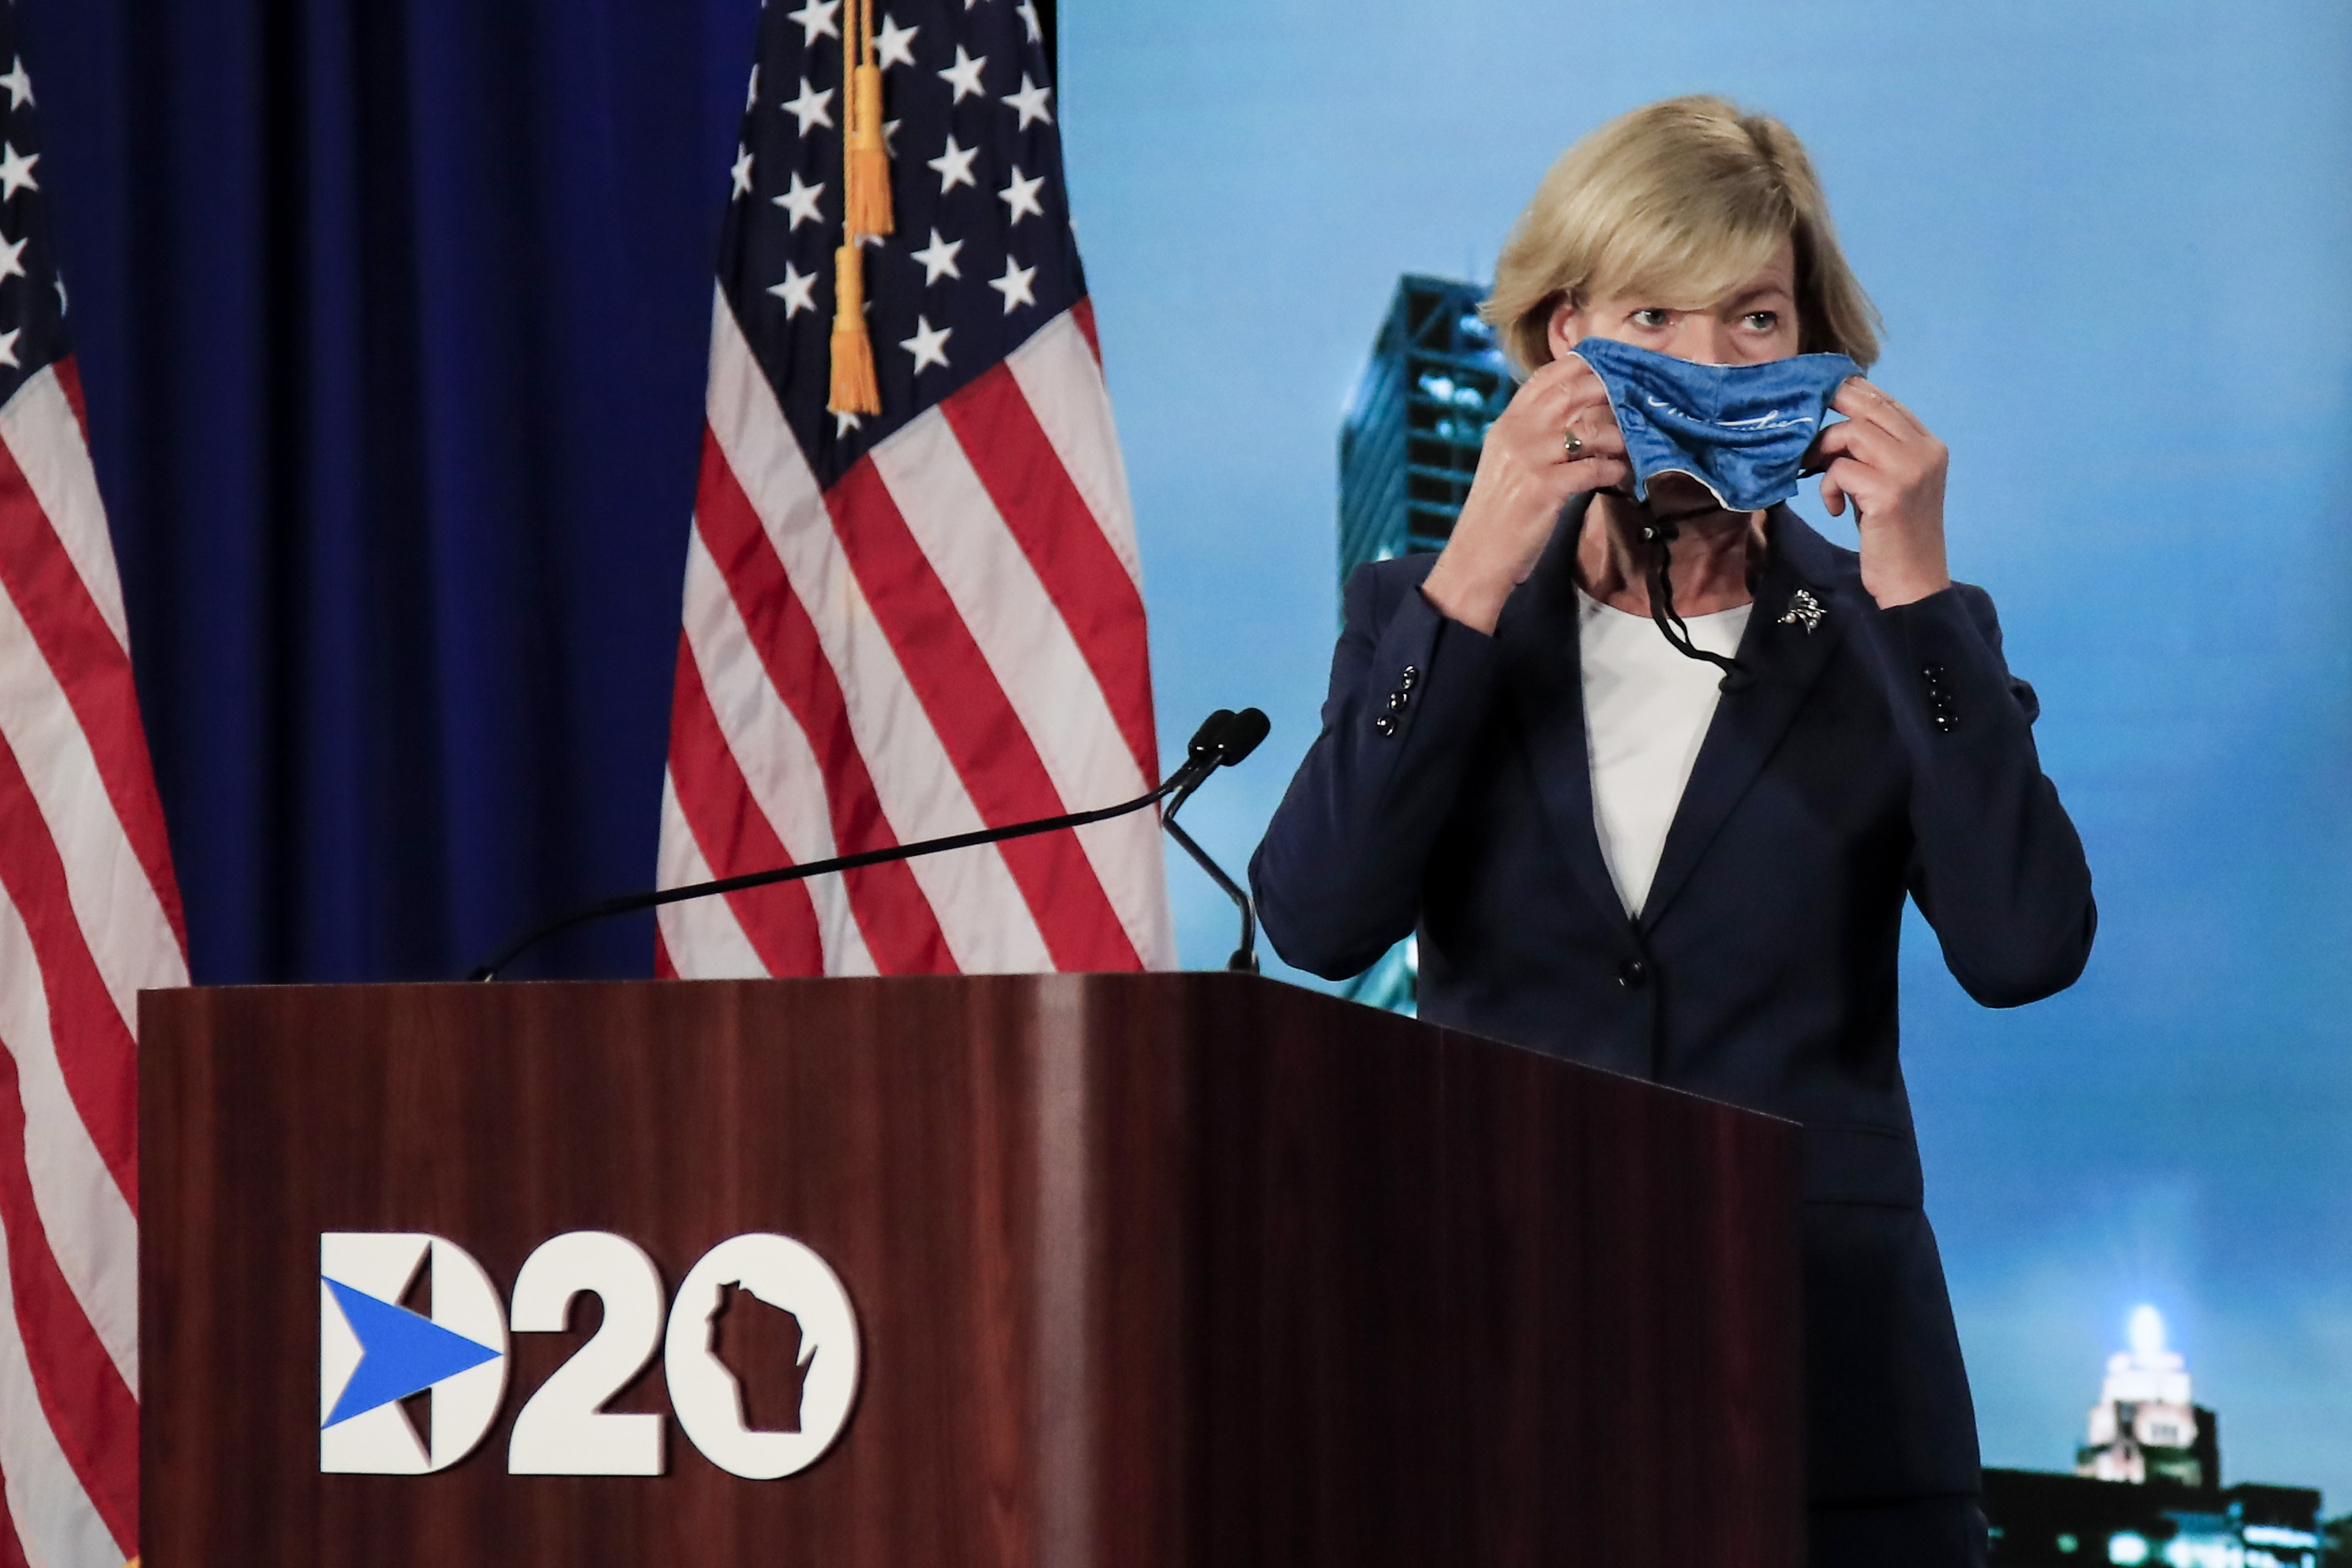 Senator Tammy Baldwin holding a mask to her face while at the Democratic National Convention podium.